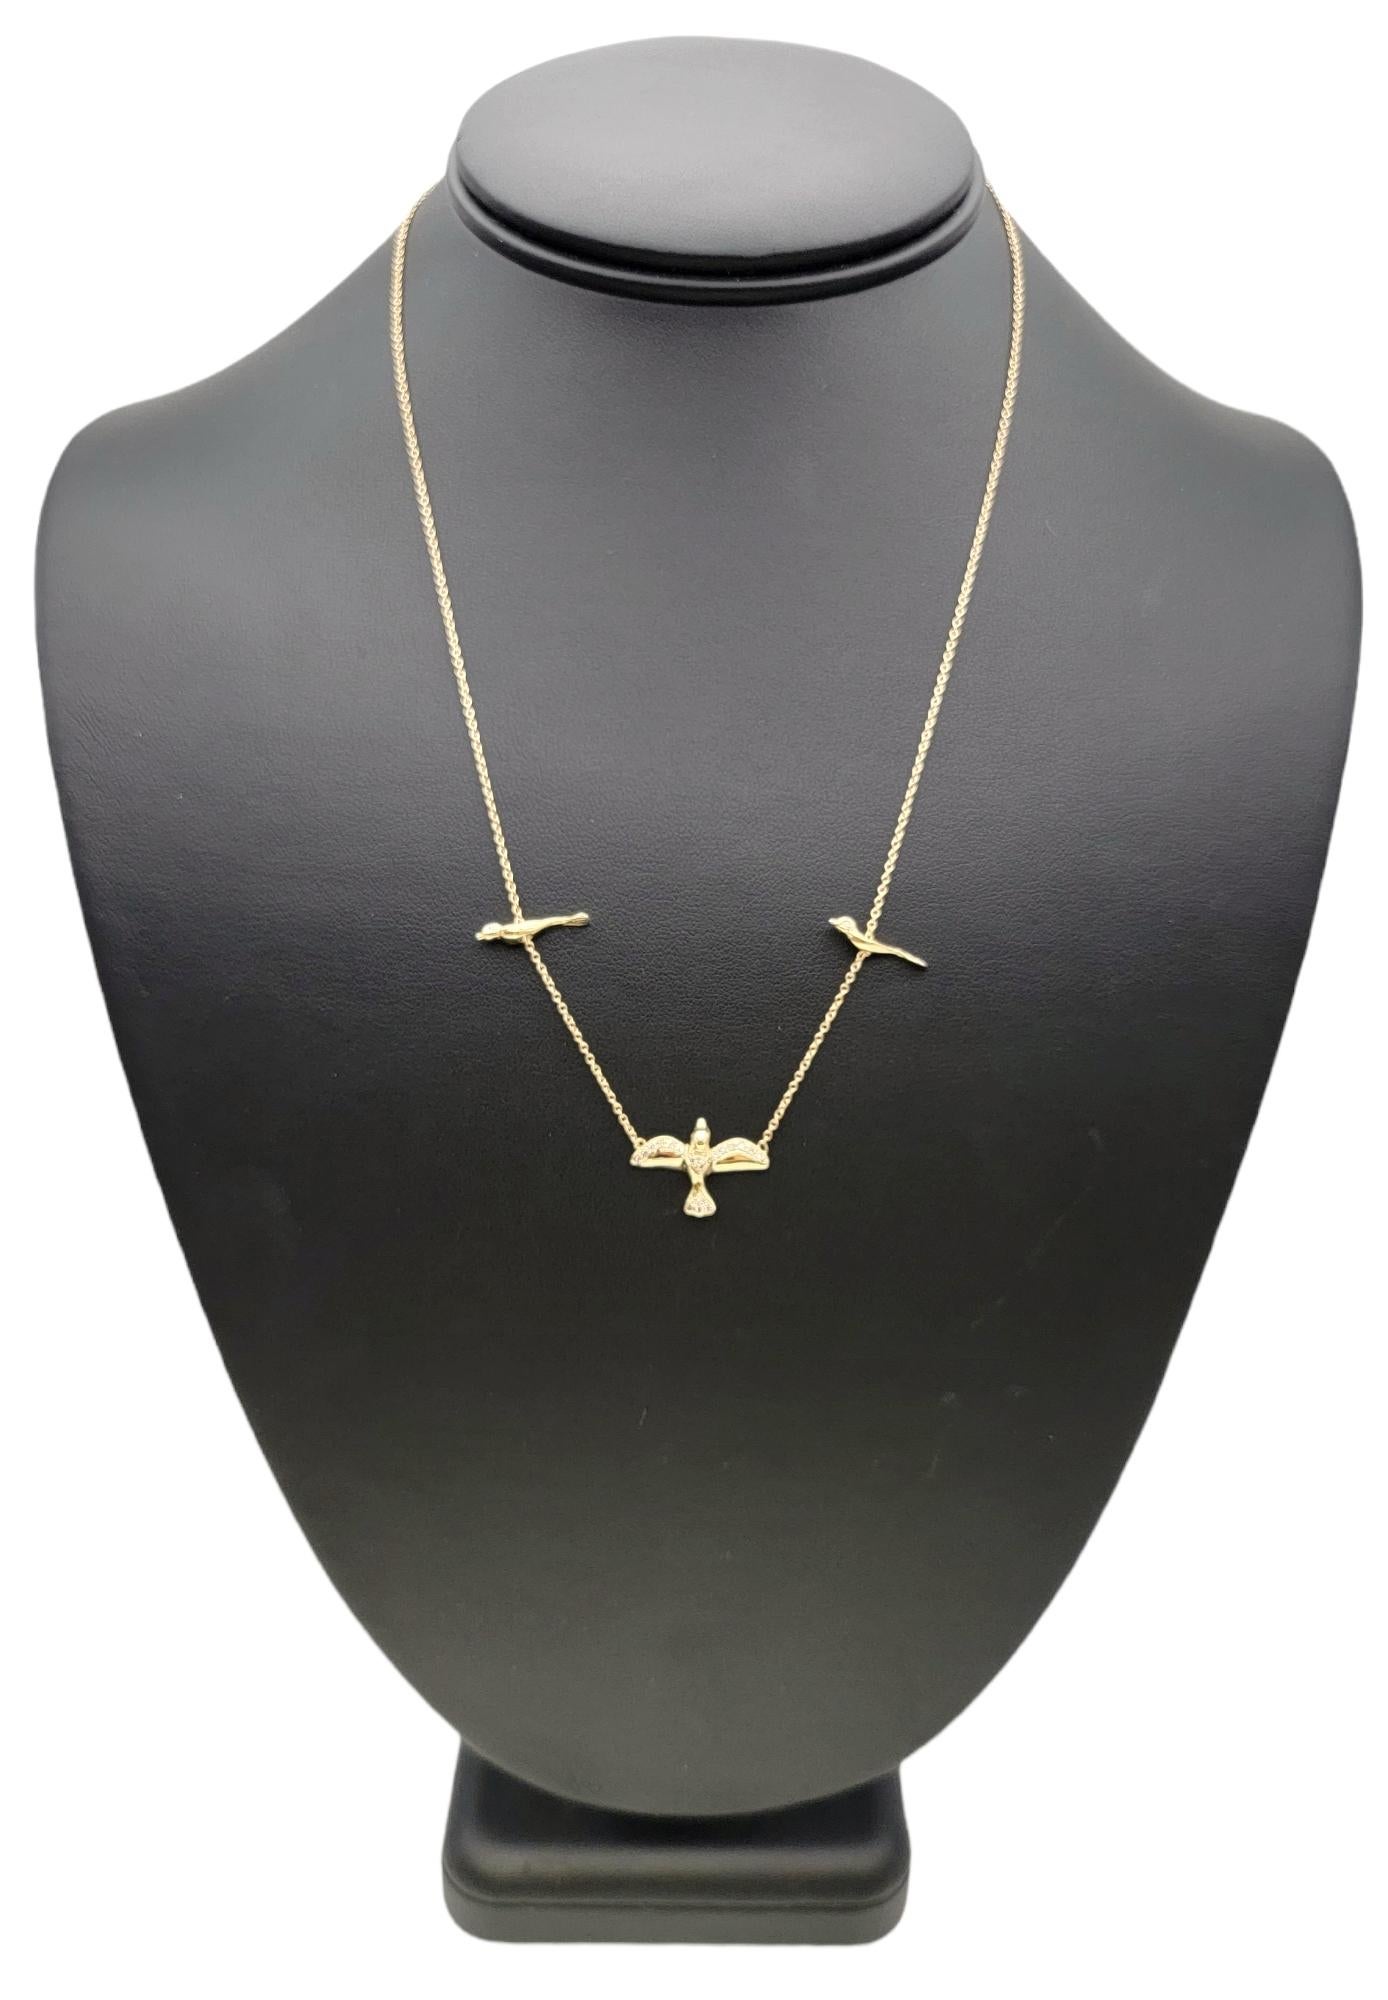 Jacquie Aiche 3 Birds Pave Diamond Station Necklace in 14 Karat Yellow Gold 1